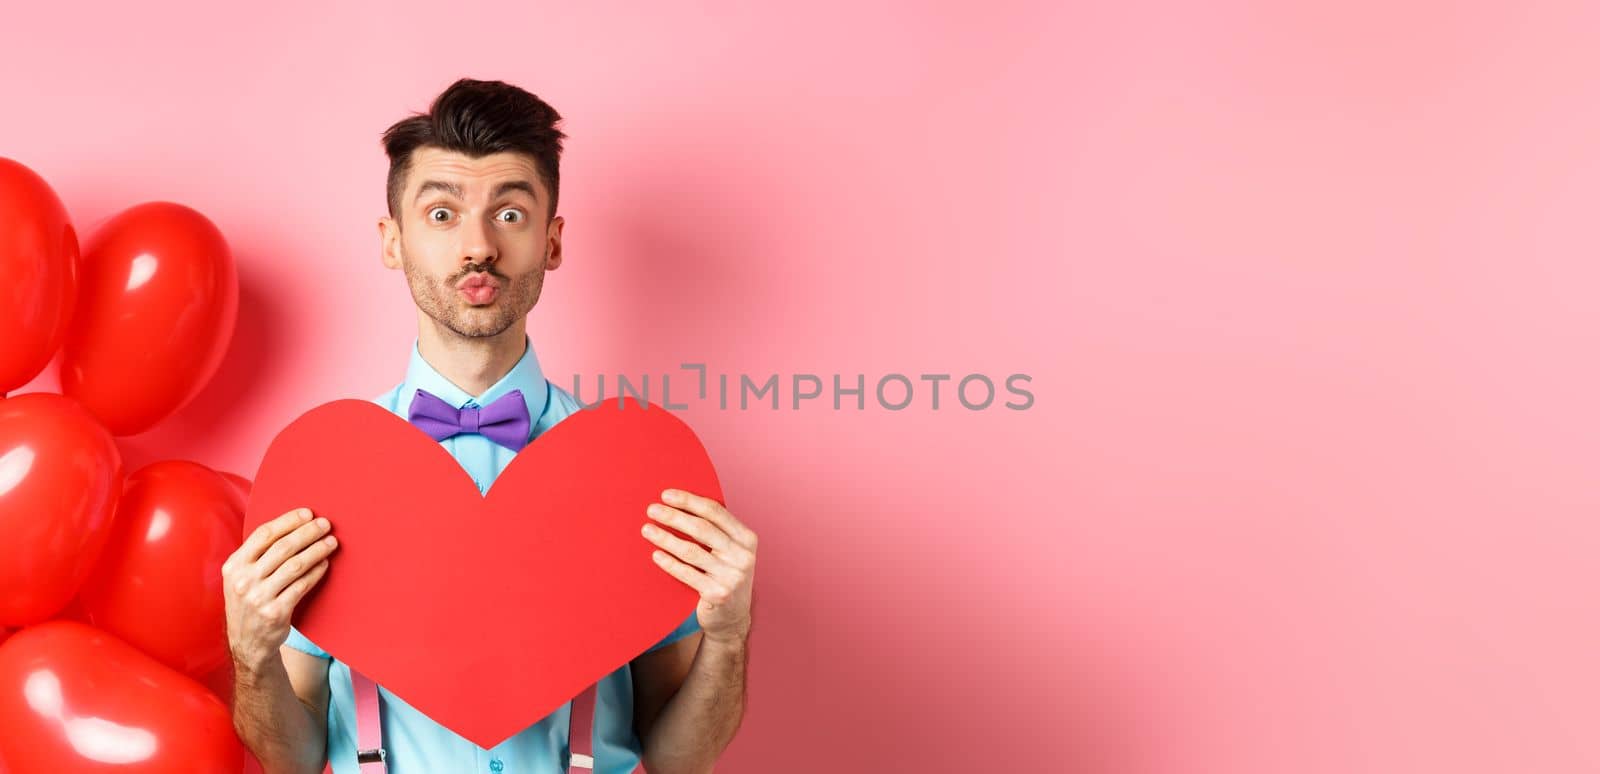 Valentines day concept. Cute guy pucker lips for kiss and showing romantic heart cutout, falling in love, standing over pink background.